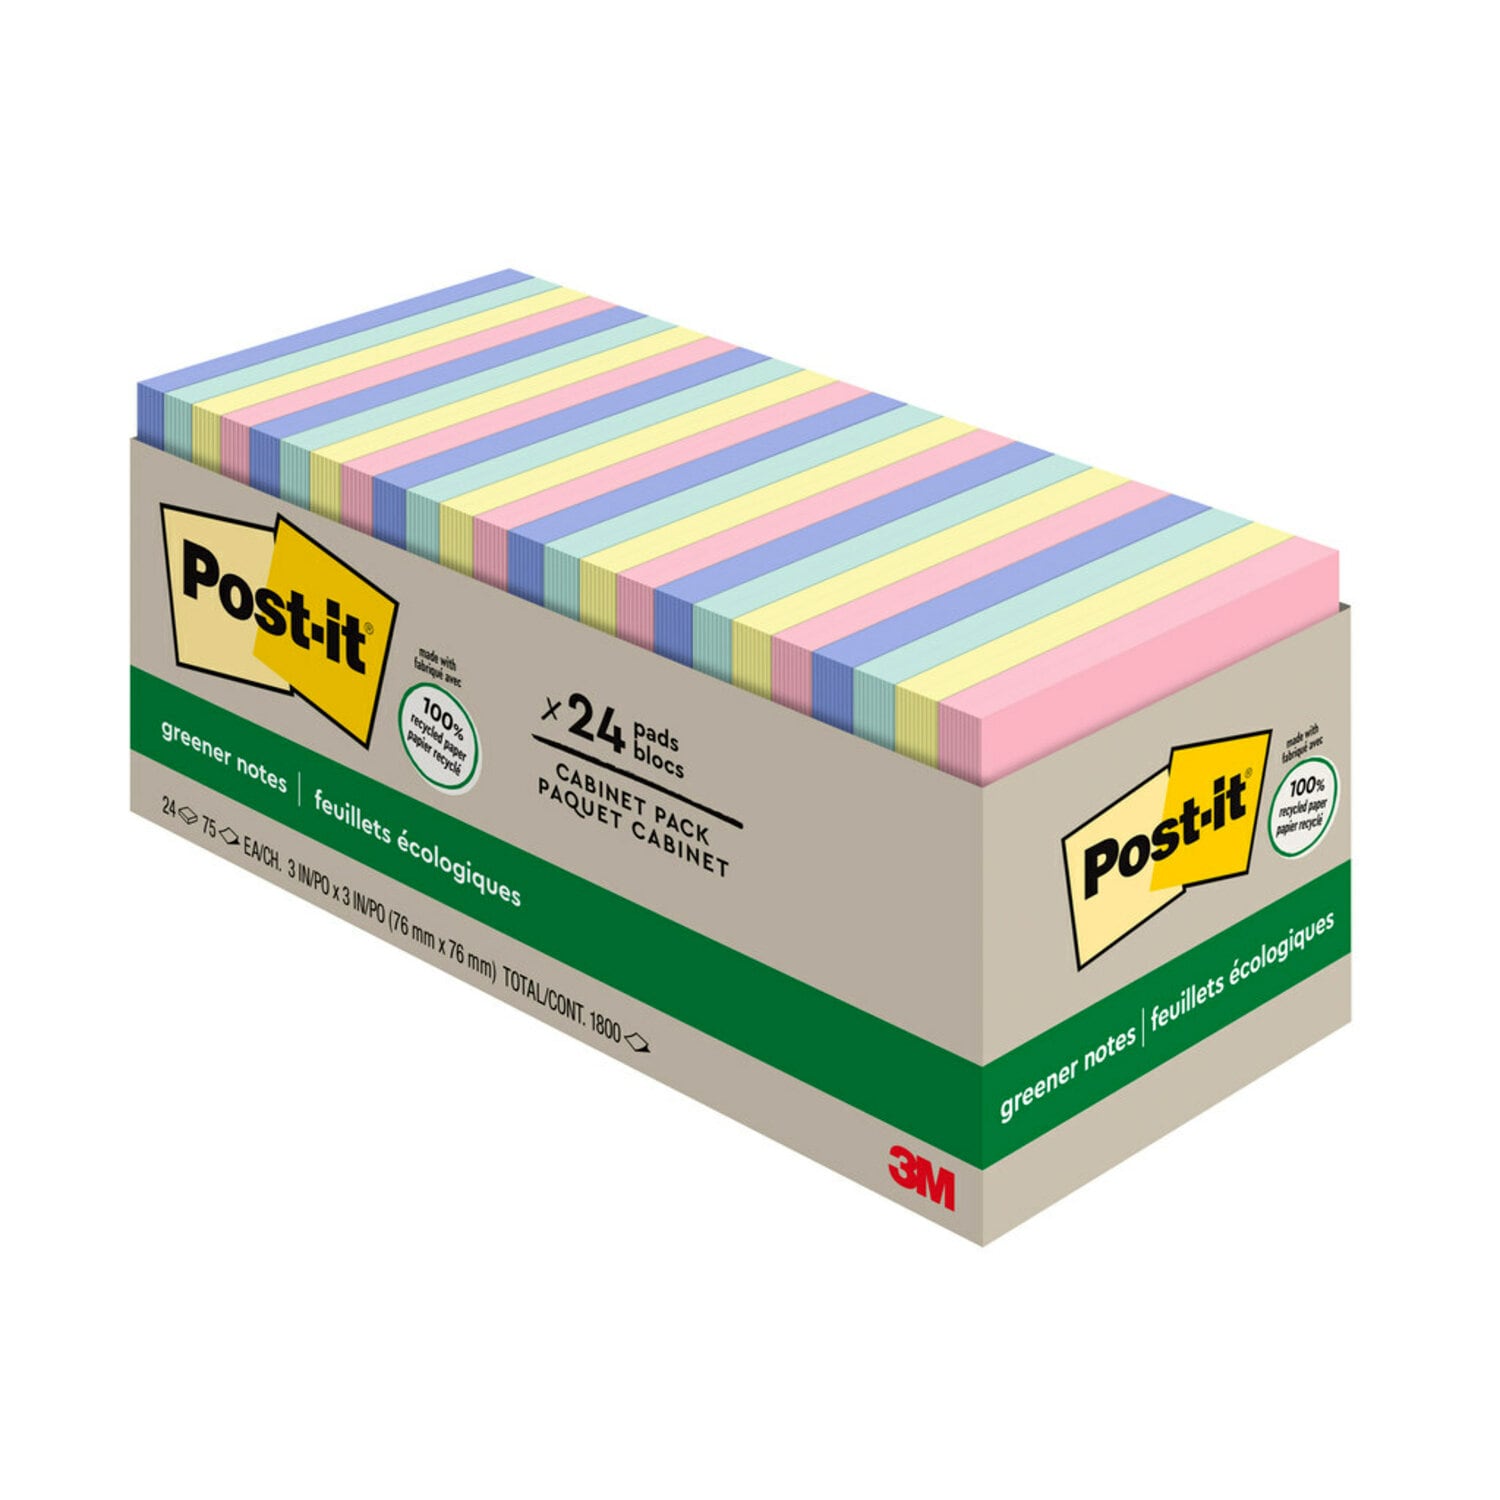 7100230237 - Post-it Notes 654R-24CP-AP, 3 in x 3 in (76 mm x 76 mm), Sweet Sprinkles Collection, Cabinet Pack